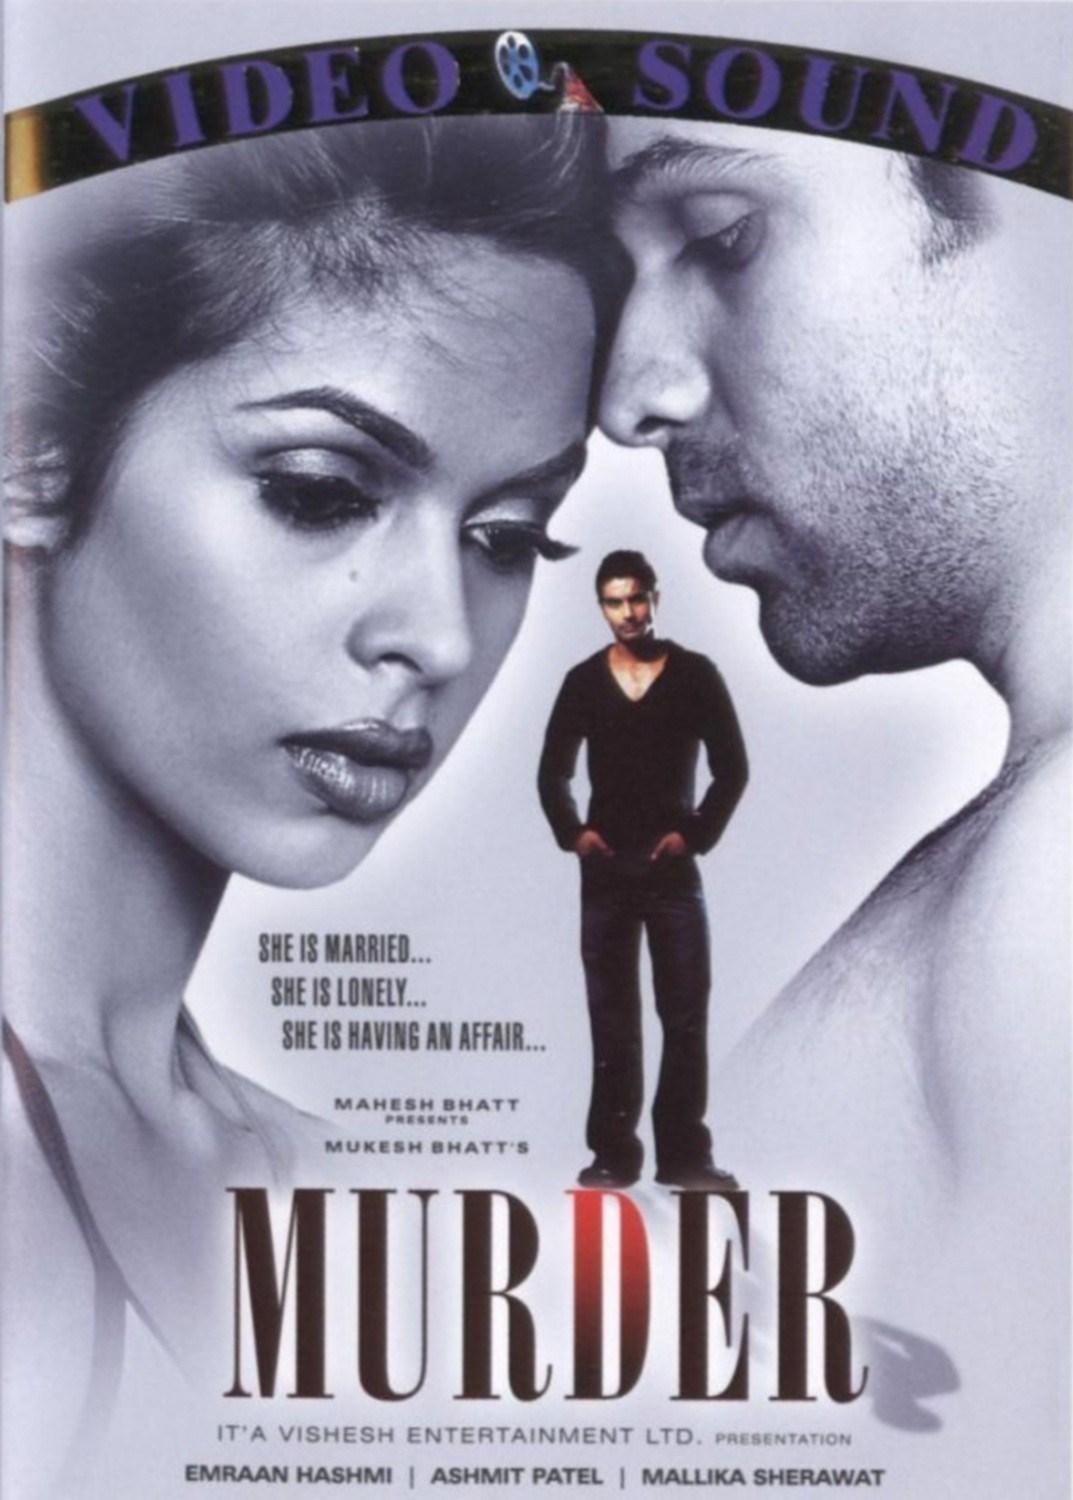 Murder: Emraan Hashmi's early role as Sunny Deva, a seductive lover entangled in a dangerous affair, showcases his ability to captivate audiences with his on-screen presence. His chemistry with co-star Mallika Sherawat adds intensity to the film's narrative, making it a memorable entry in his filmography.